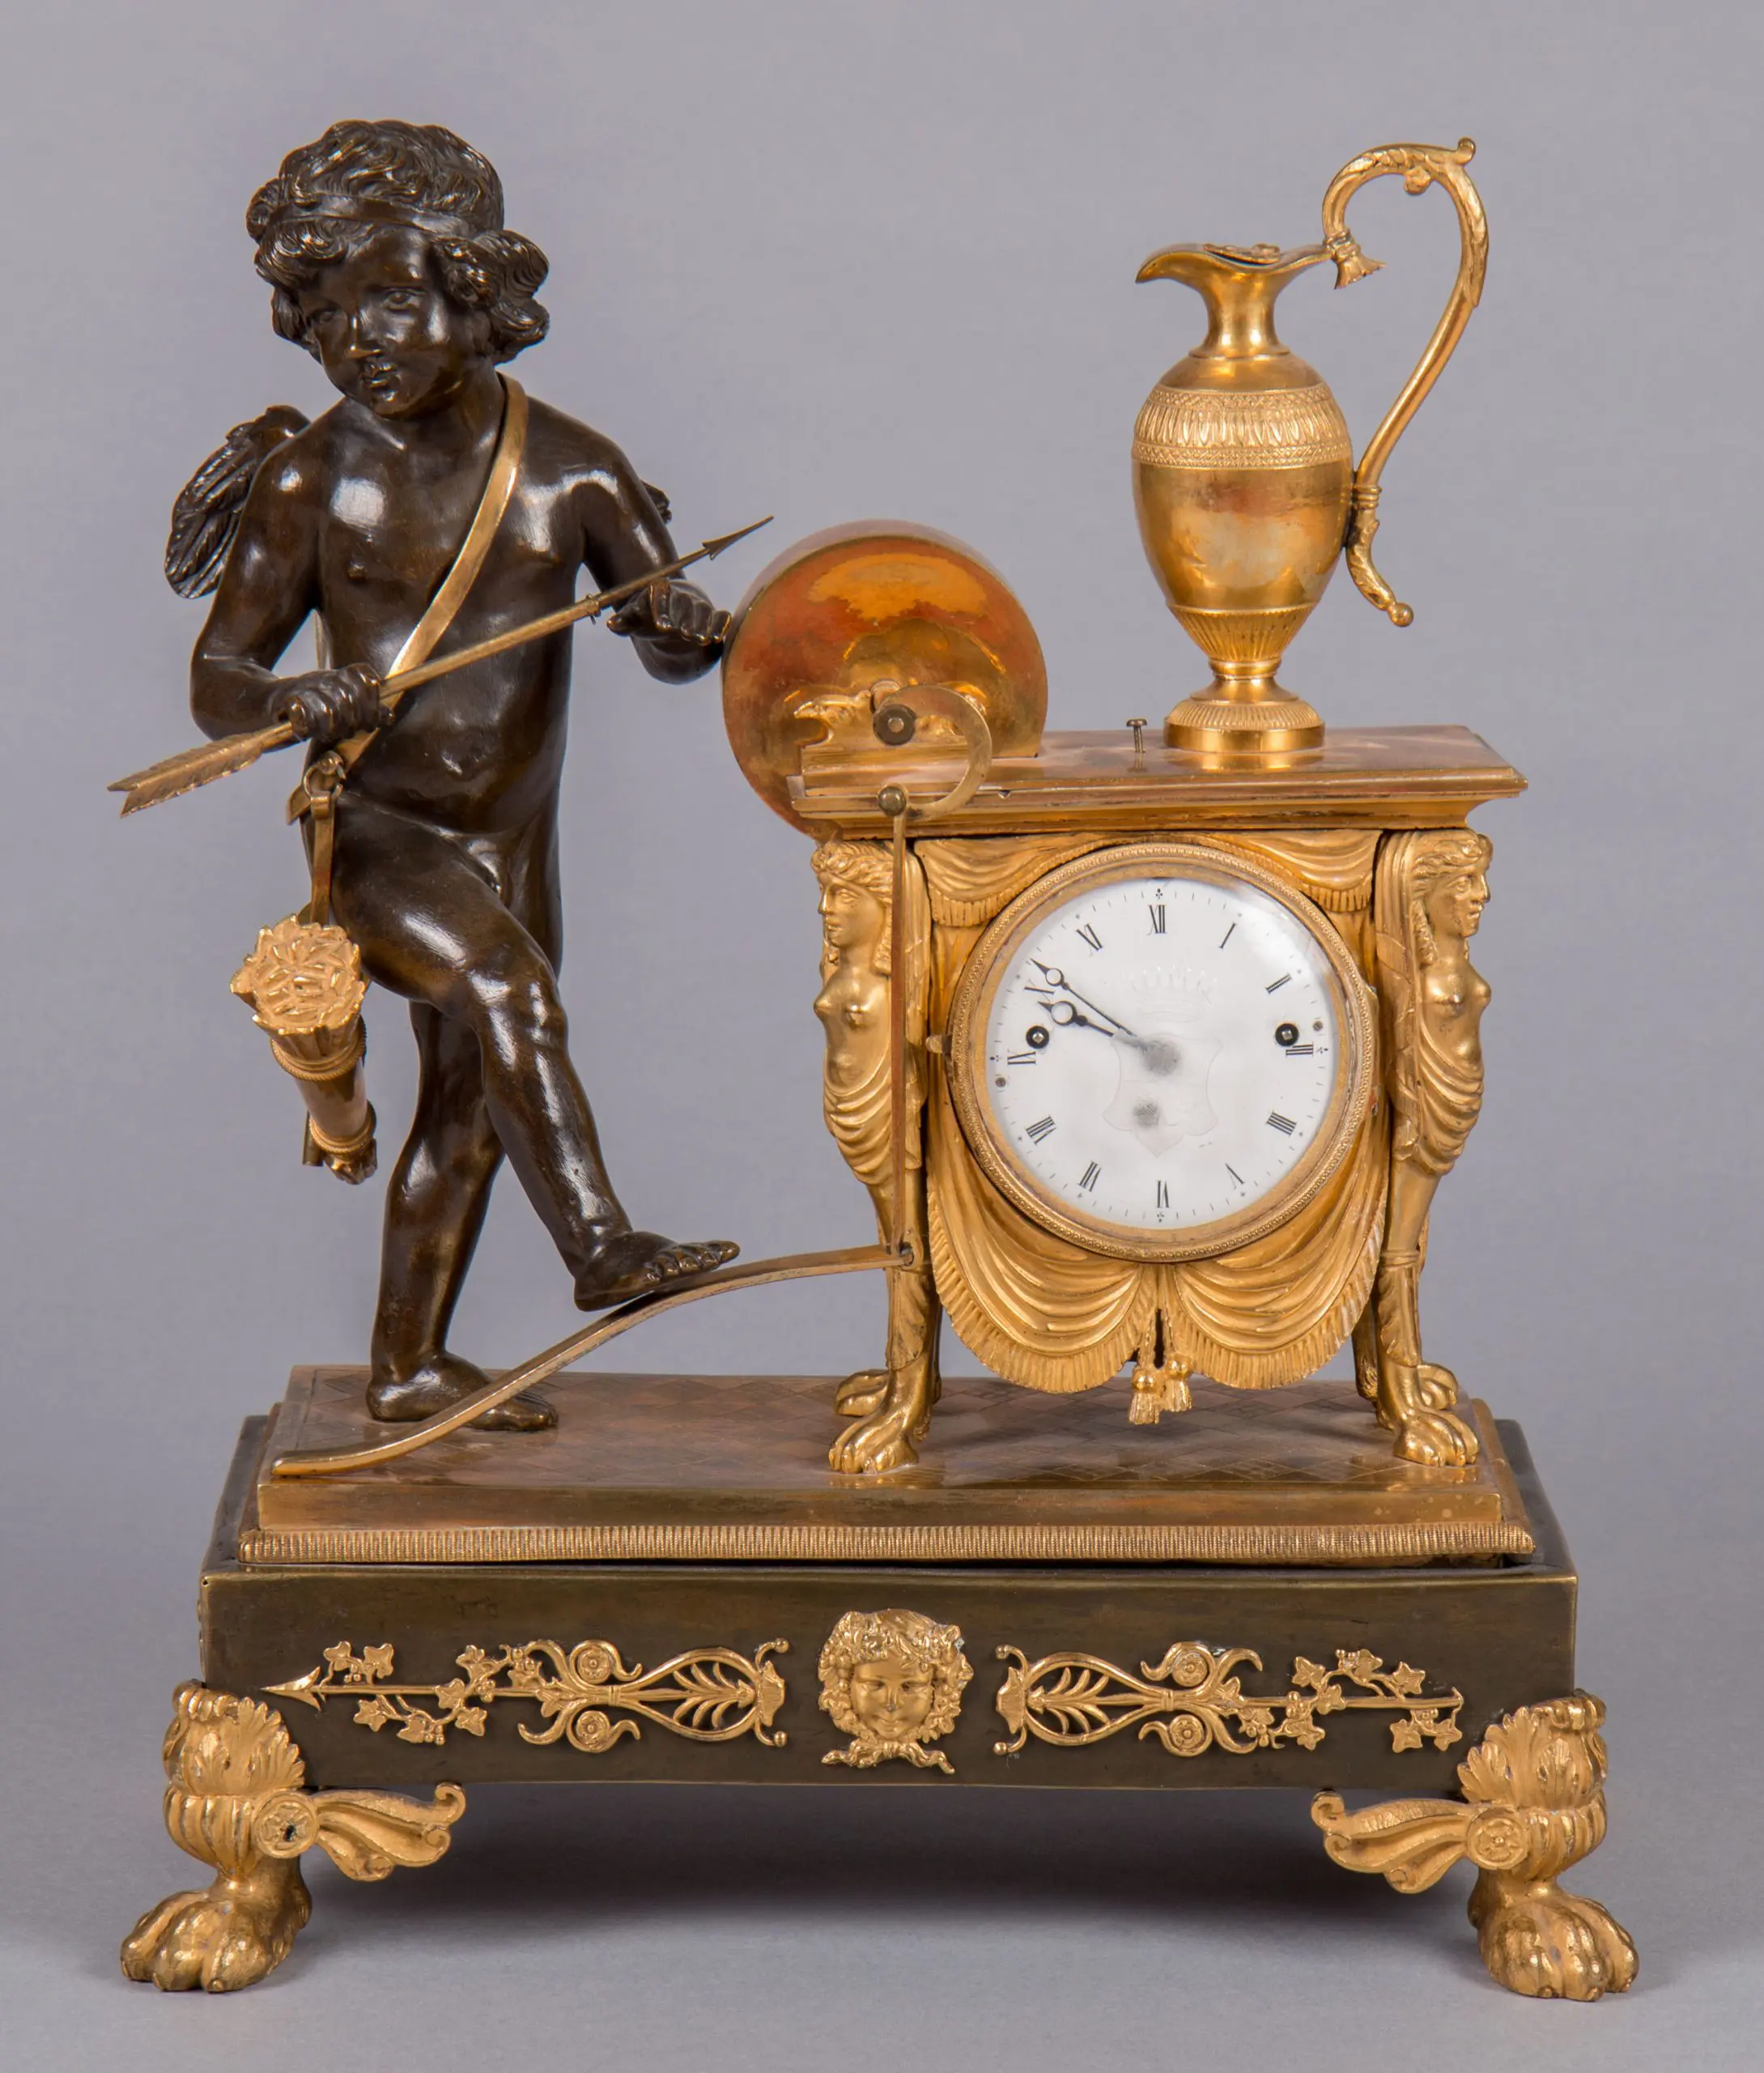 Figural empire mantel clock “Amor” - Stephan Andréewitch